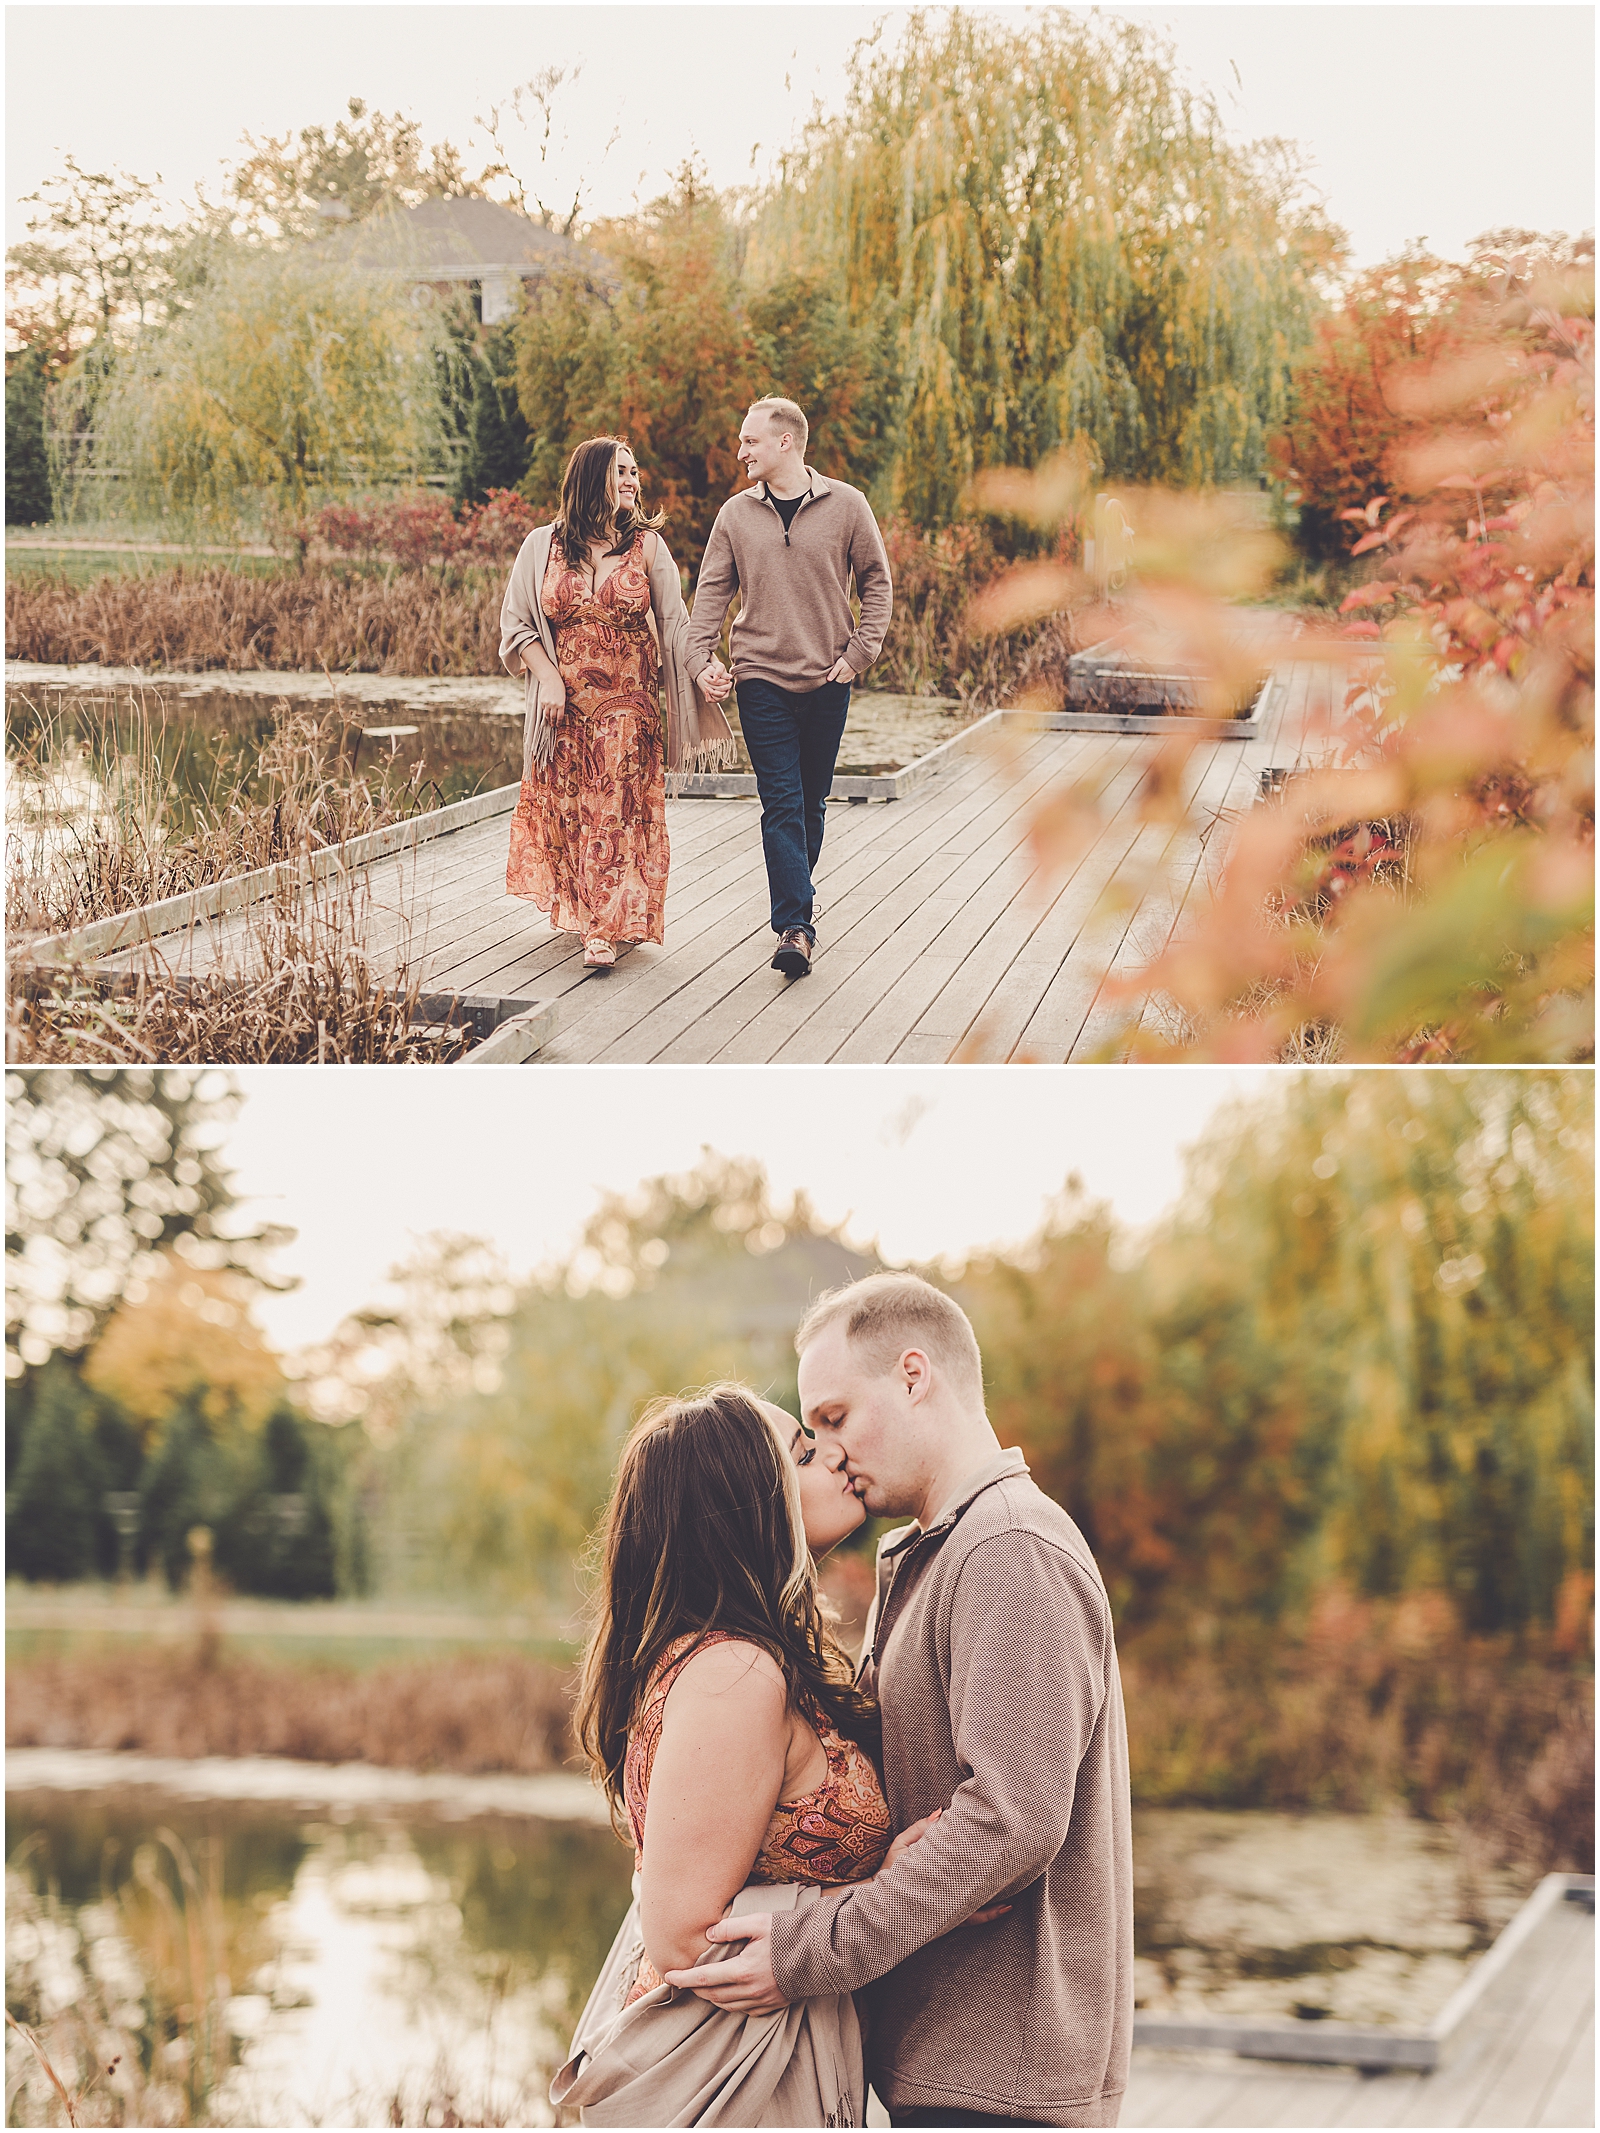 Nicole and Thomas's fall Cantigny Park engagement photos in Wheaton with Chicagoland wedding photographer Kara Evans Photographer.